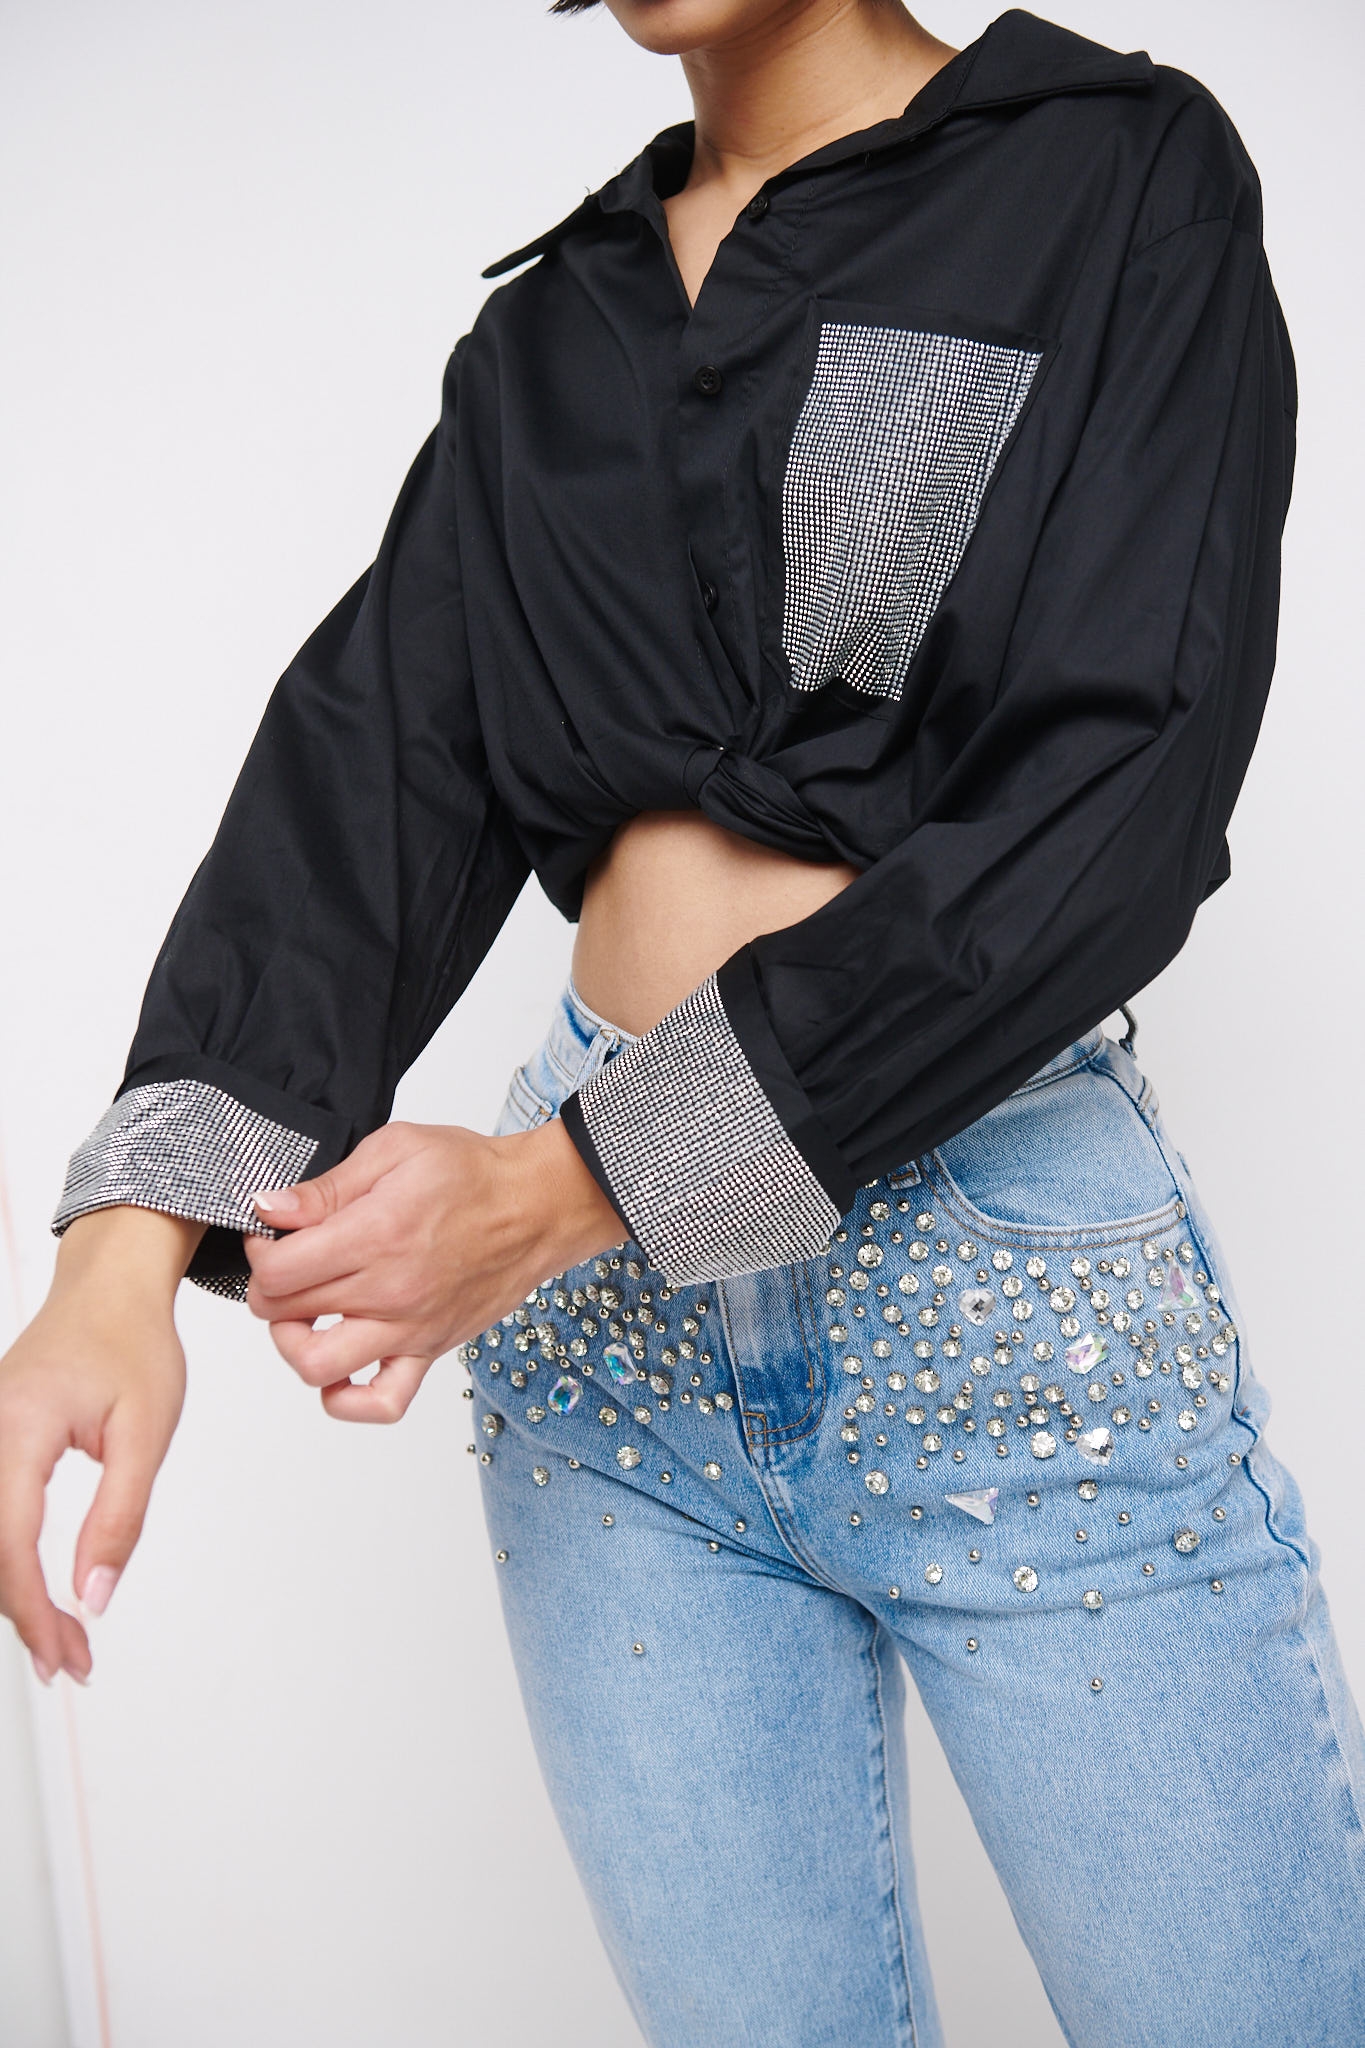 Shirt With Rhinestones On The Pocket And Sleeves